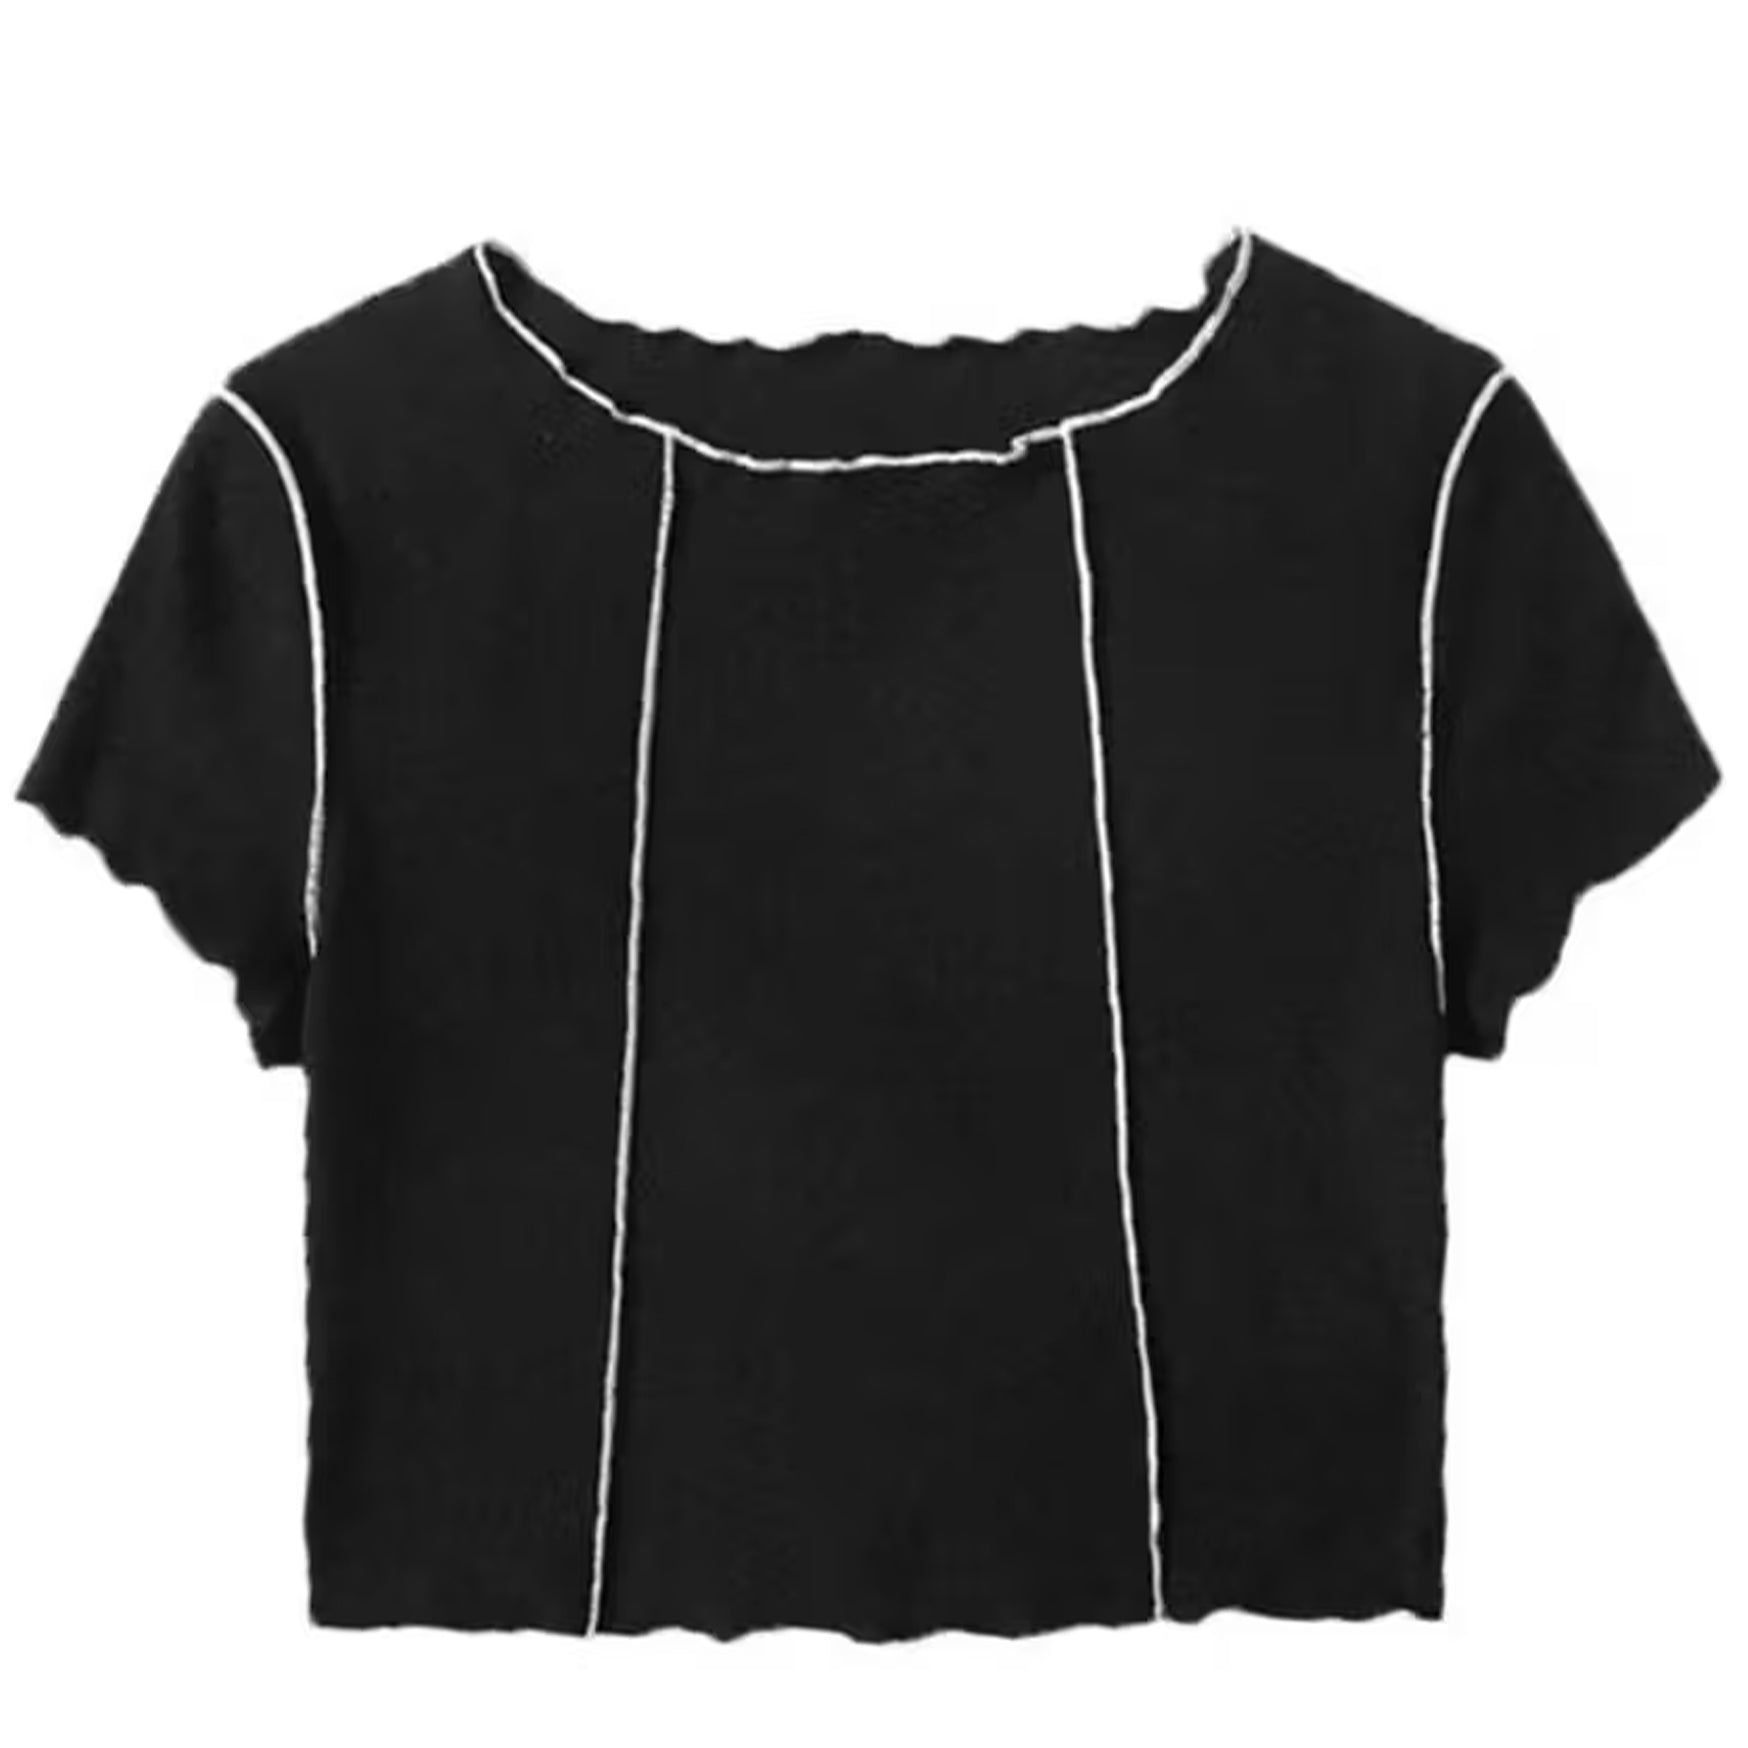 Khhalisi Knit Crop Top for Womens Black (S)